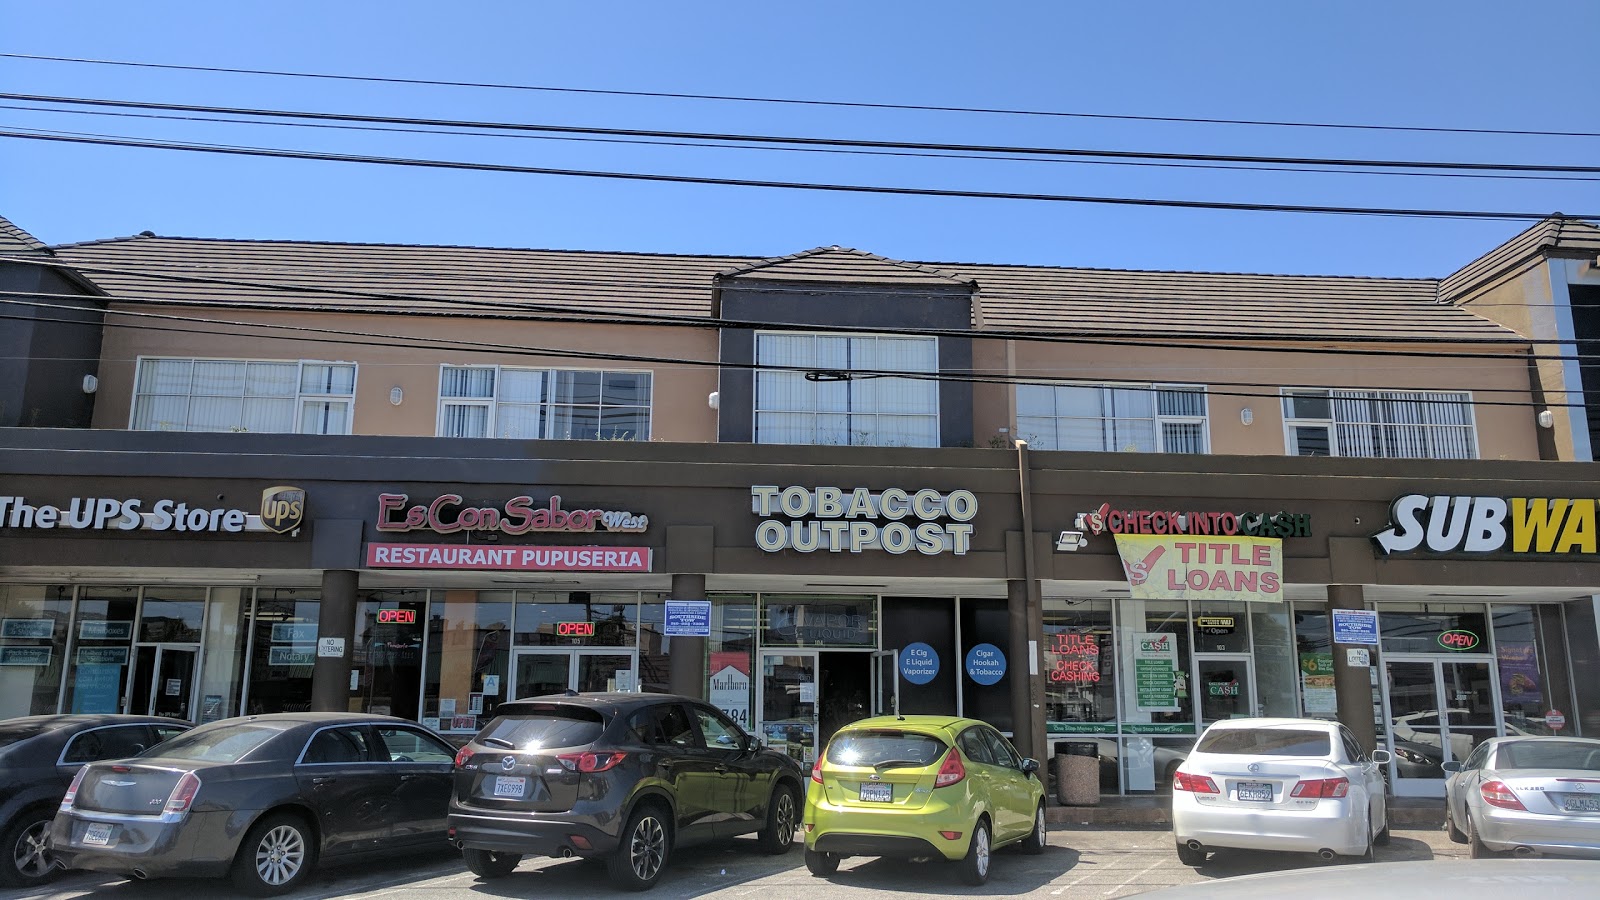 Member Tobacco Outpost in Los Angeles CA